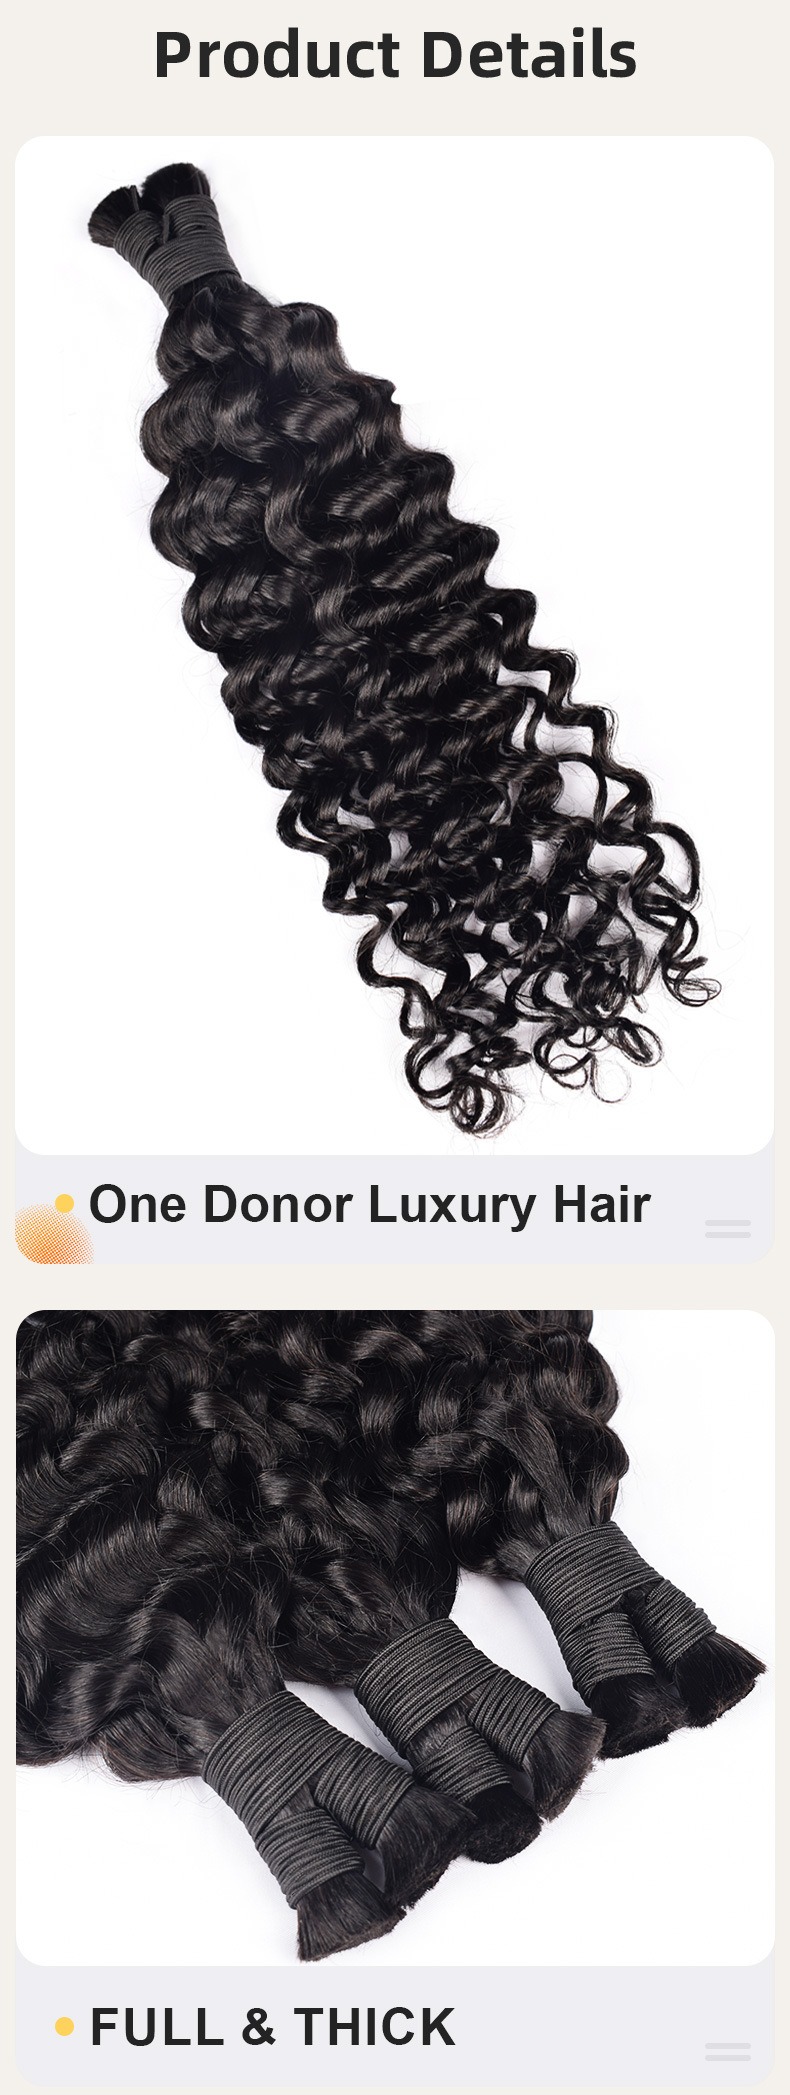 Deep curly black real hair, great for versatile styling